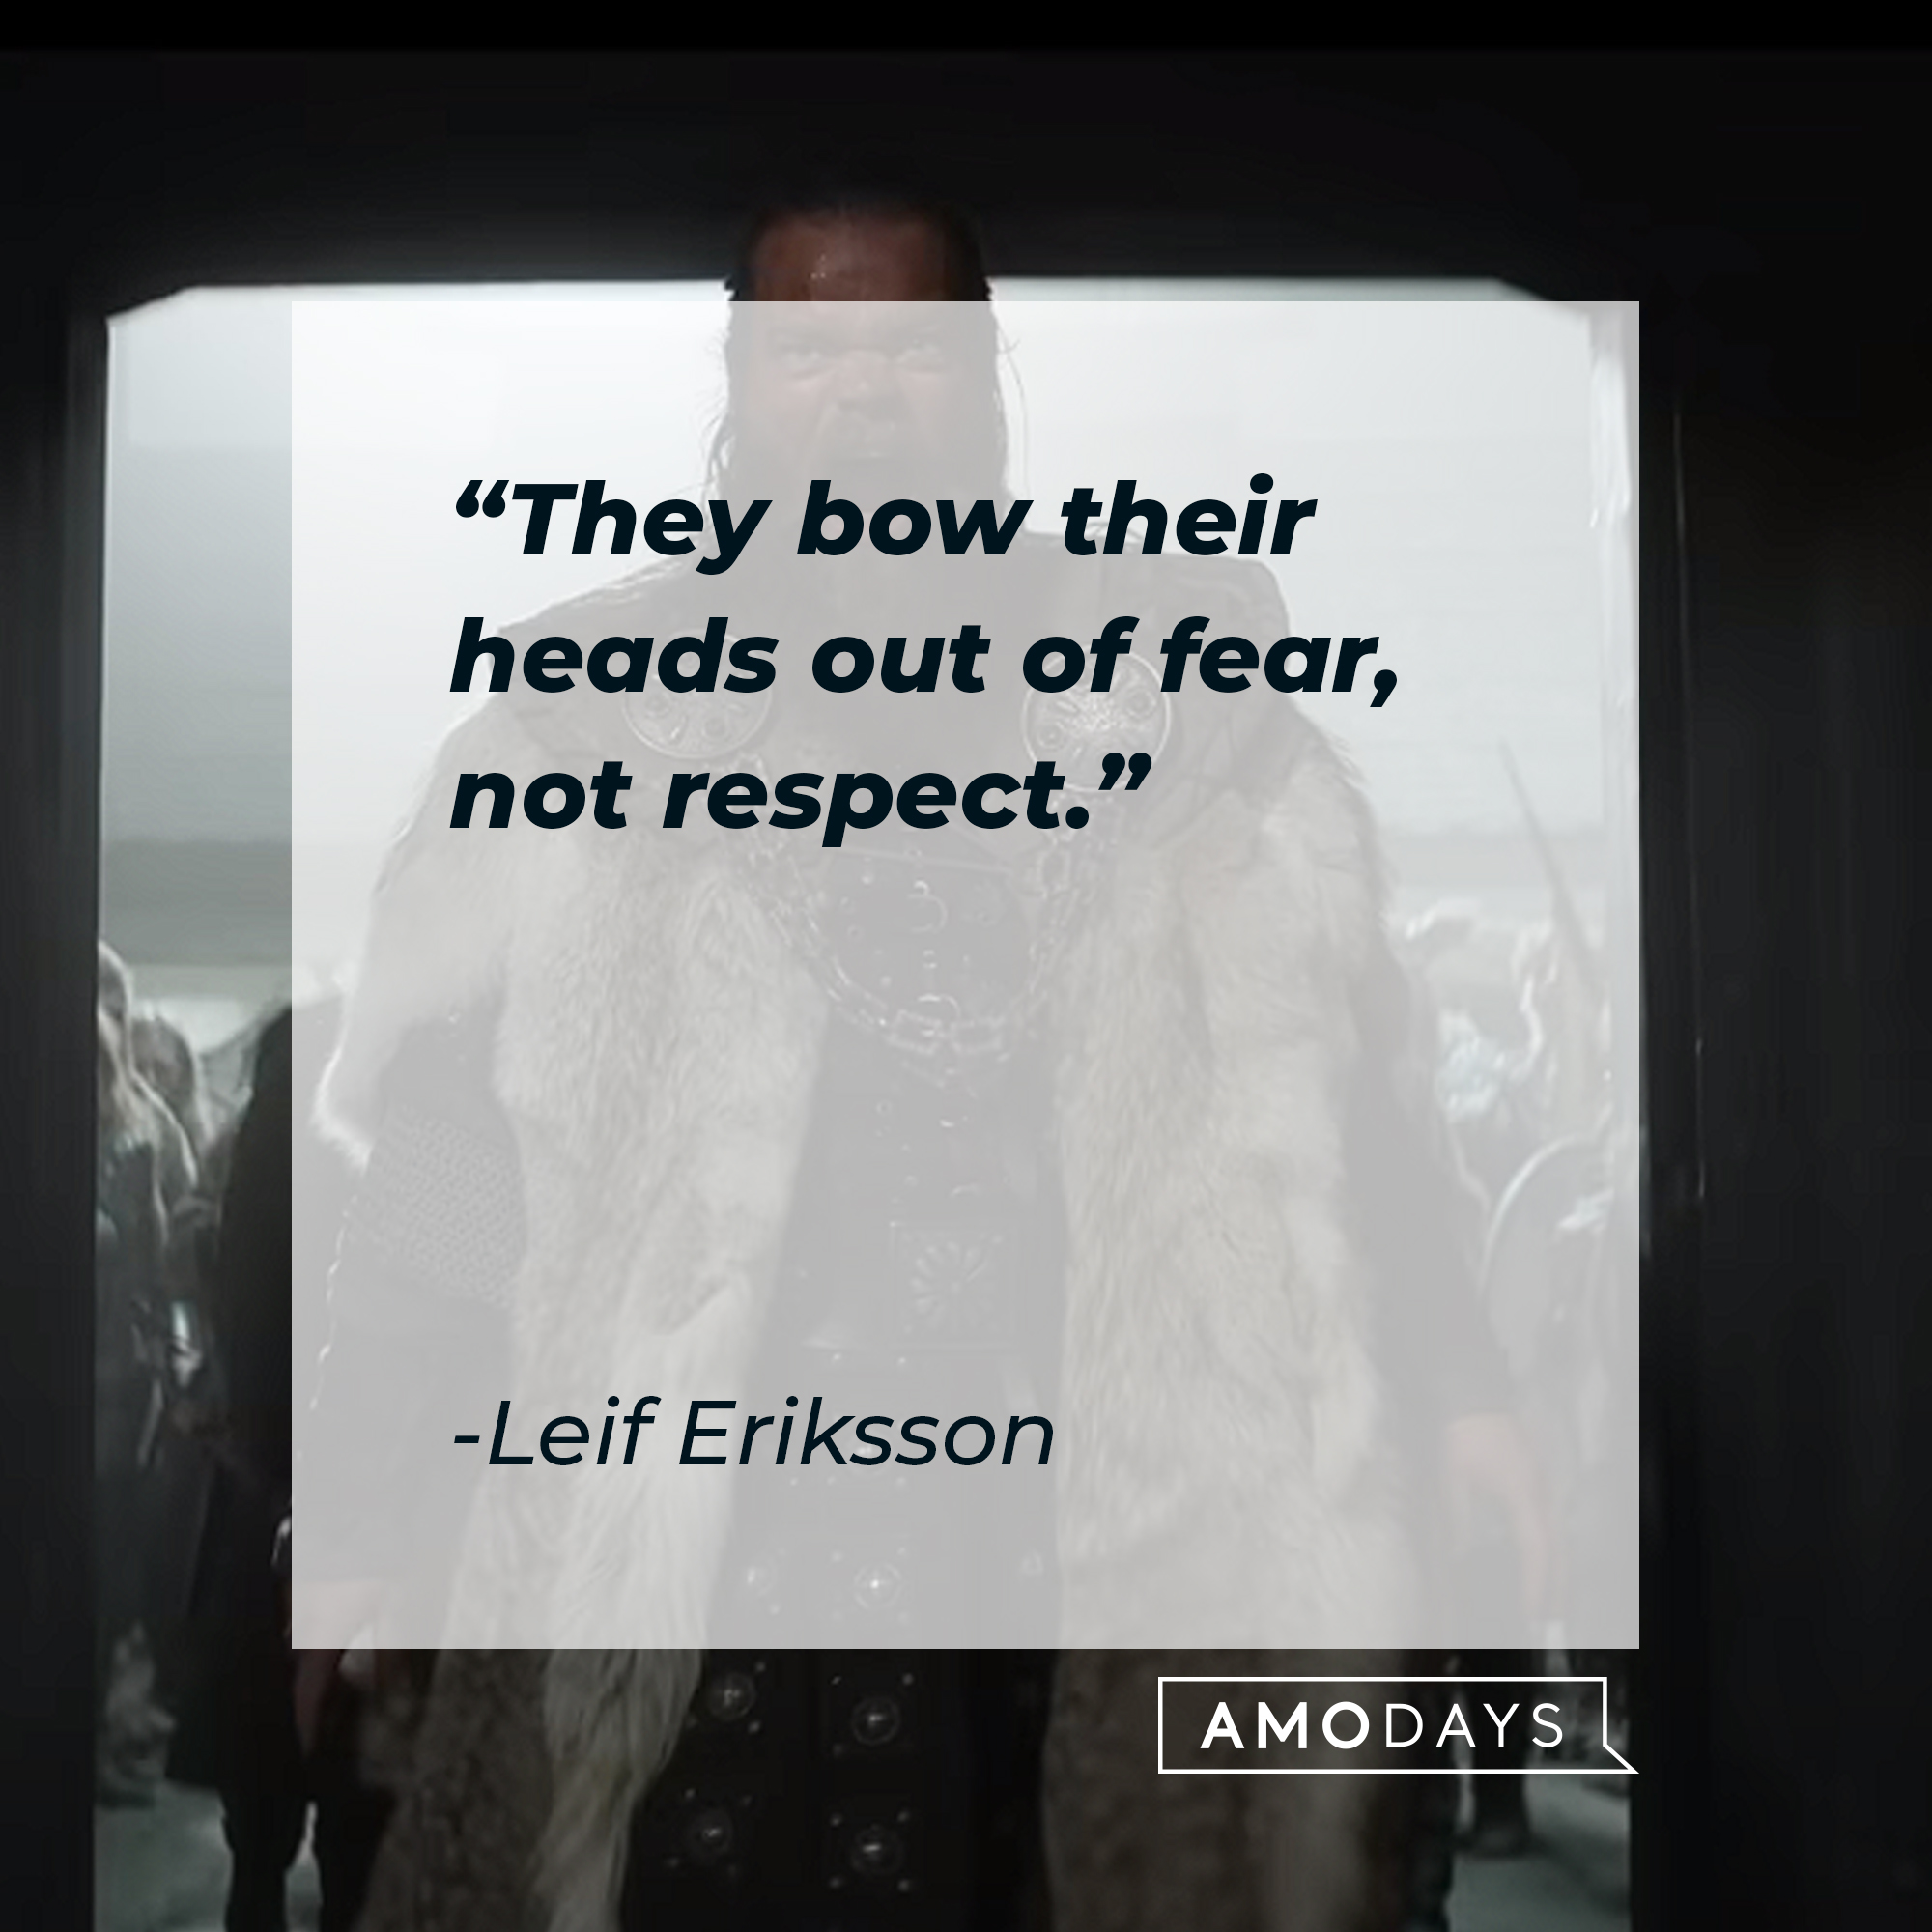 A picture of a character from “Vikings: Valhalla” with Leif Eriksson’s quote: “They bow their heads out of fear, not respect.”  | Source: youtube.com/Netflix